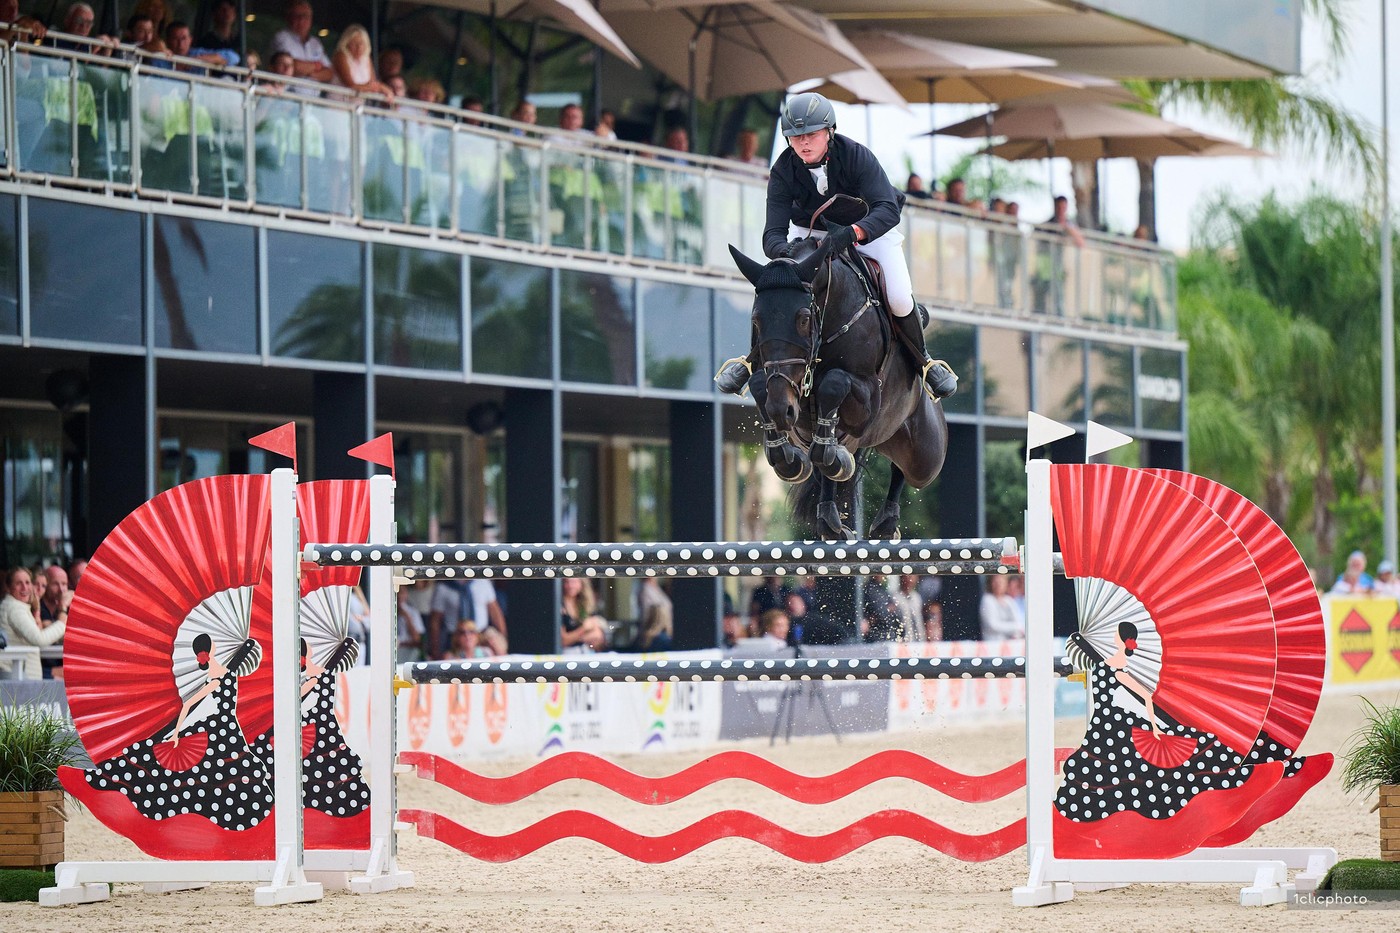 Jason Foley and Rockwell RC race to the win in the CSI2* 1.45m Grand Prix  presented by Rent A Car Dénia at the Autumn MET II 2022 - MET Oliva